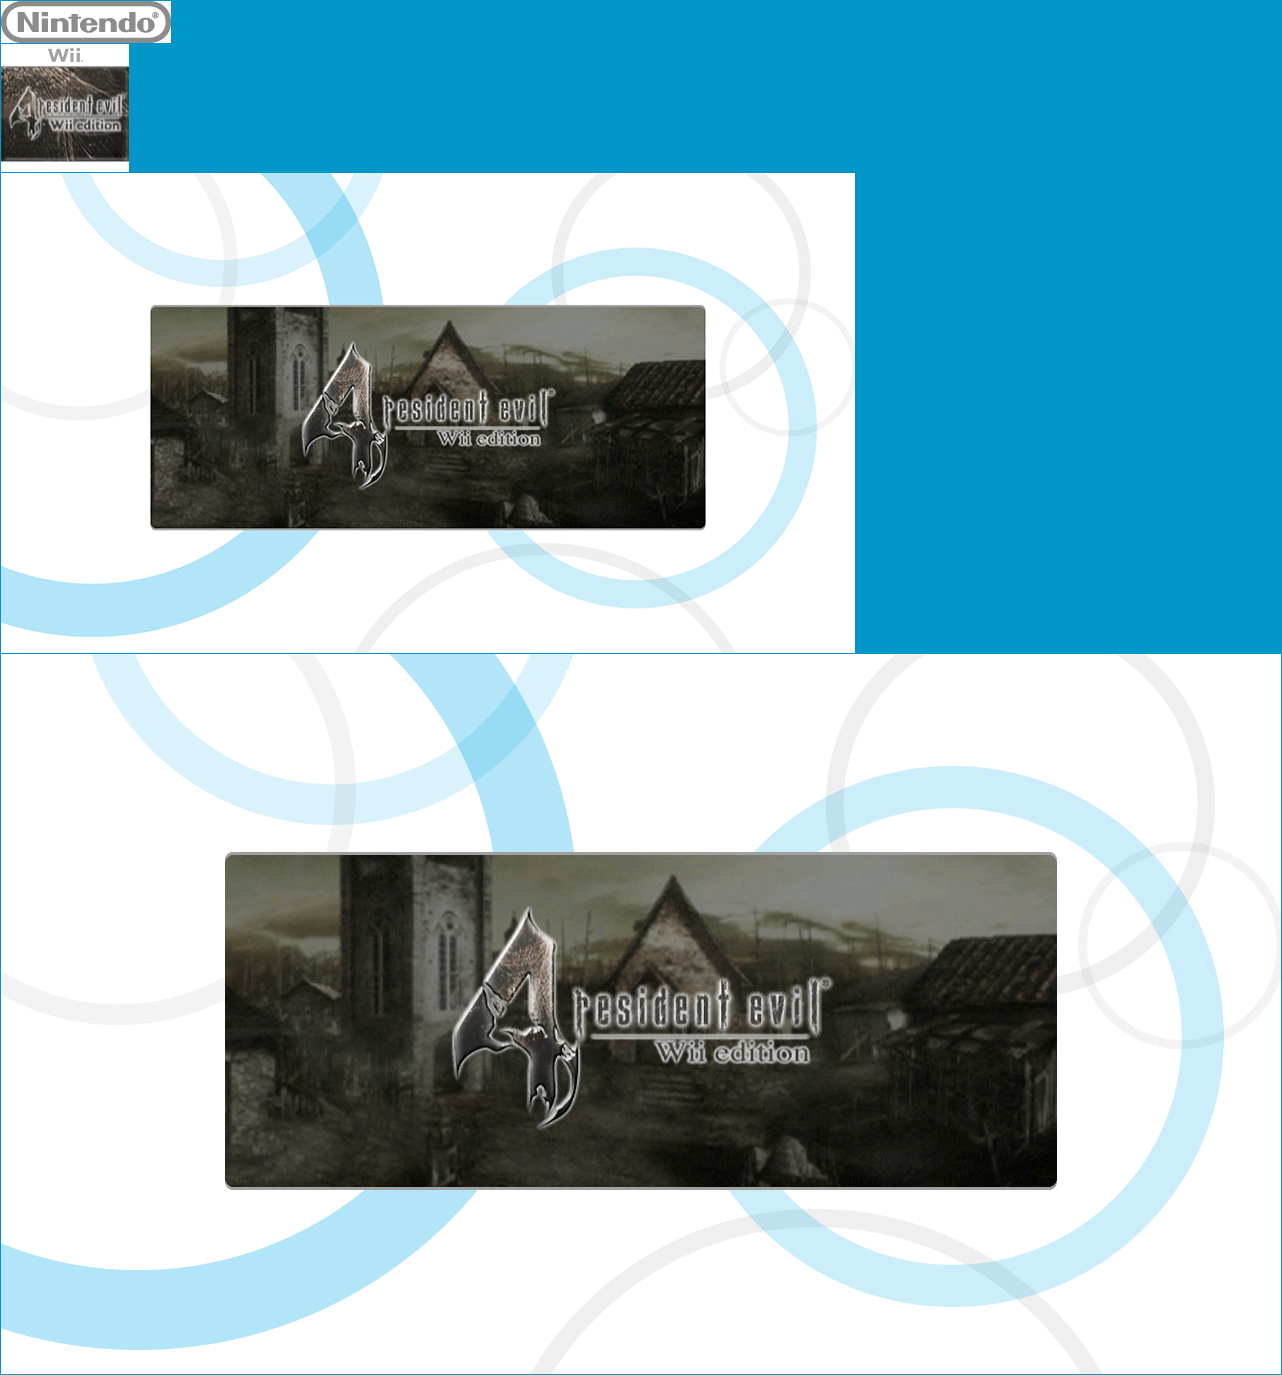 Virtual Console - Resident Evil 4: Wii Edition